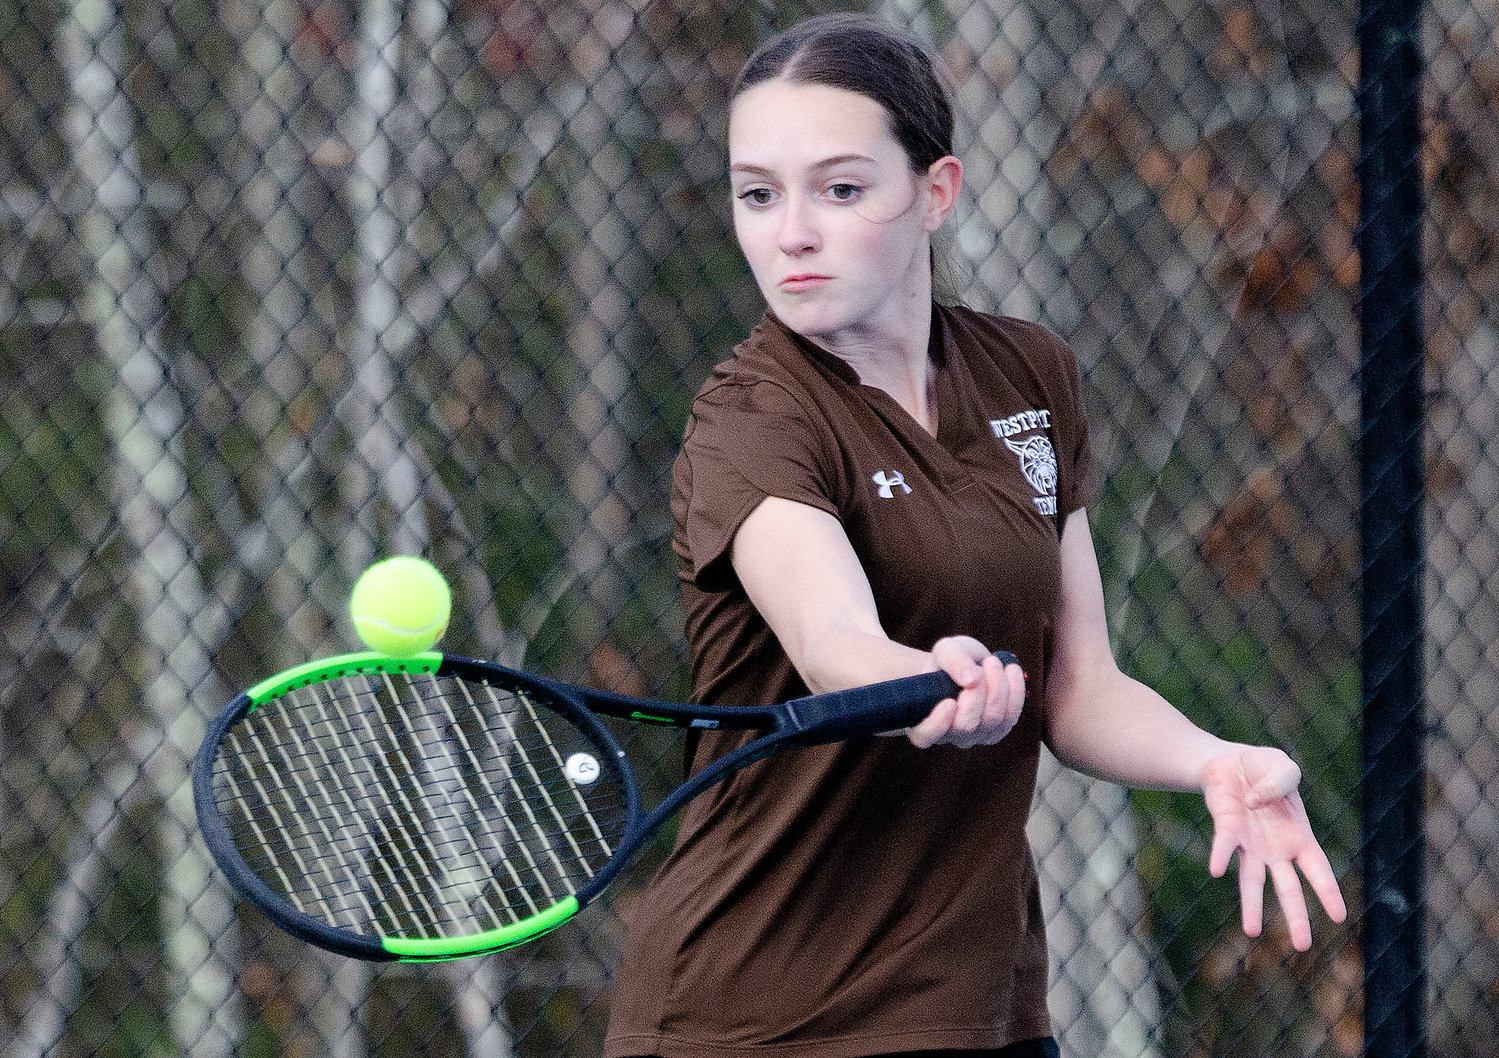 Wildcats first singles player Kaelyn Jones beat Bishop Connolly's Rebecca Colangri, 6-0, 6-0. The Wildcats are now 3-2 as they play three games this week.